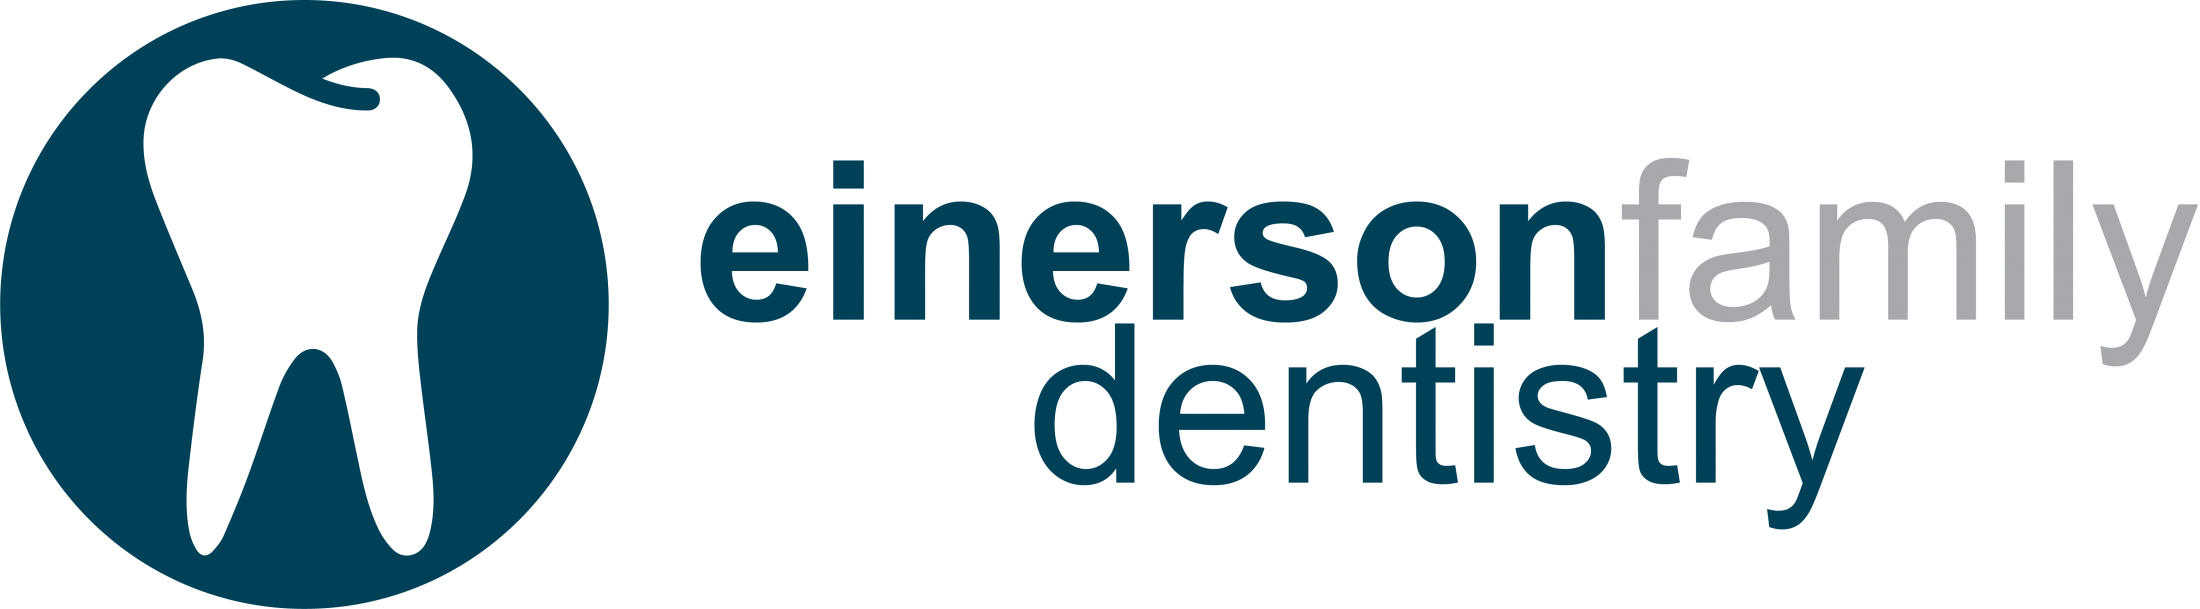 Link to Einerson Family Dentistry home page